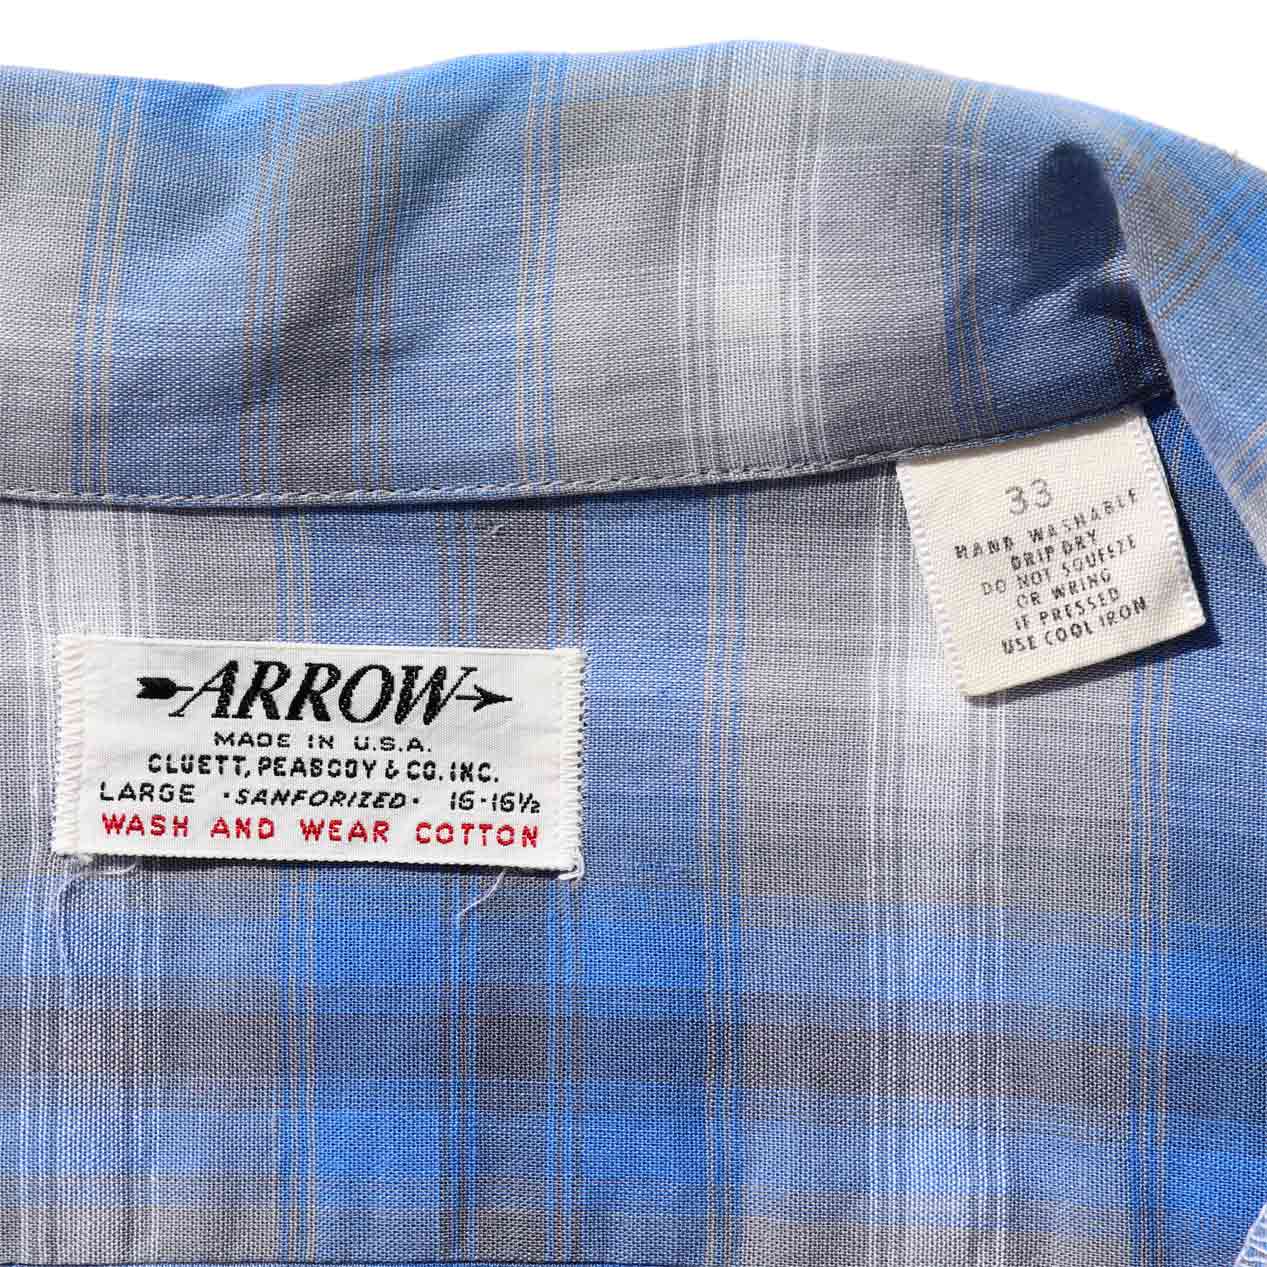 POST JUNK / 60’s ARROW All Cotton Ombre Check Open Collar Shirt Made In